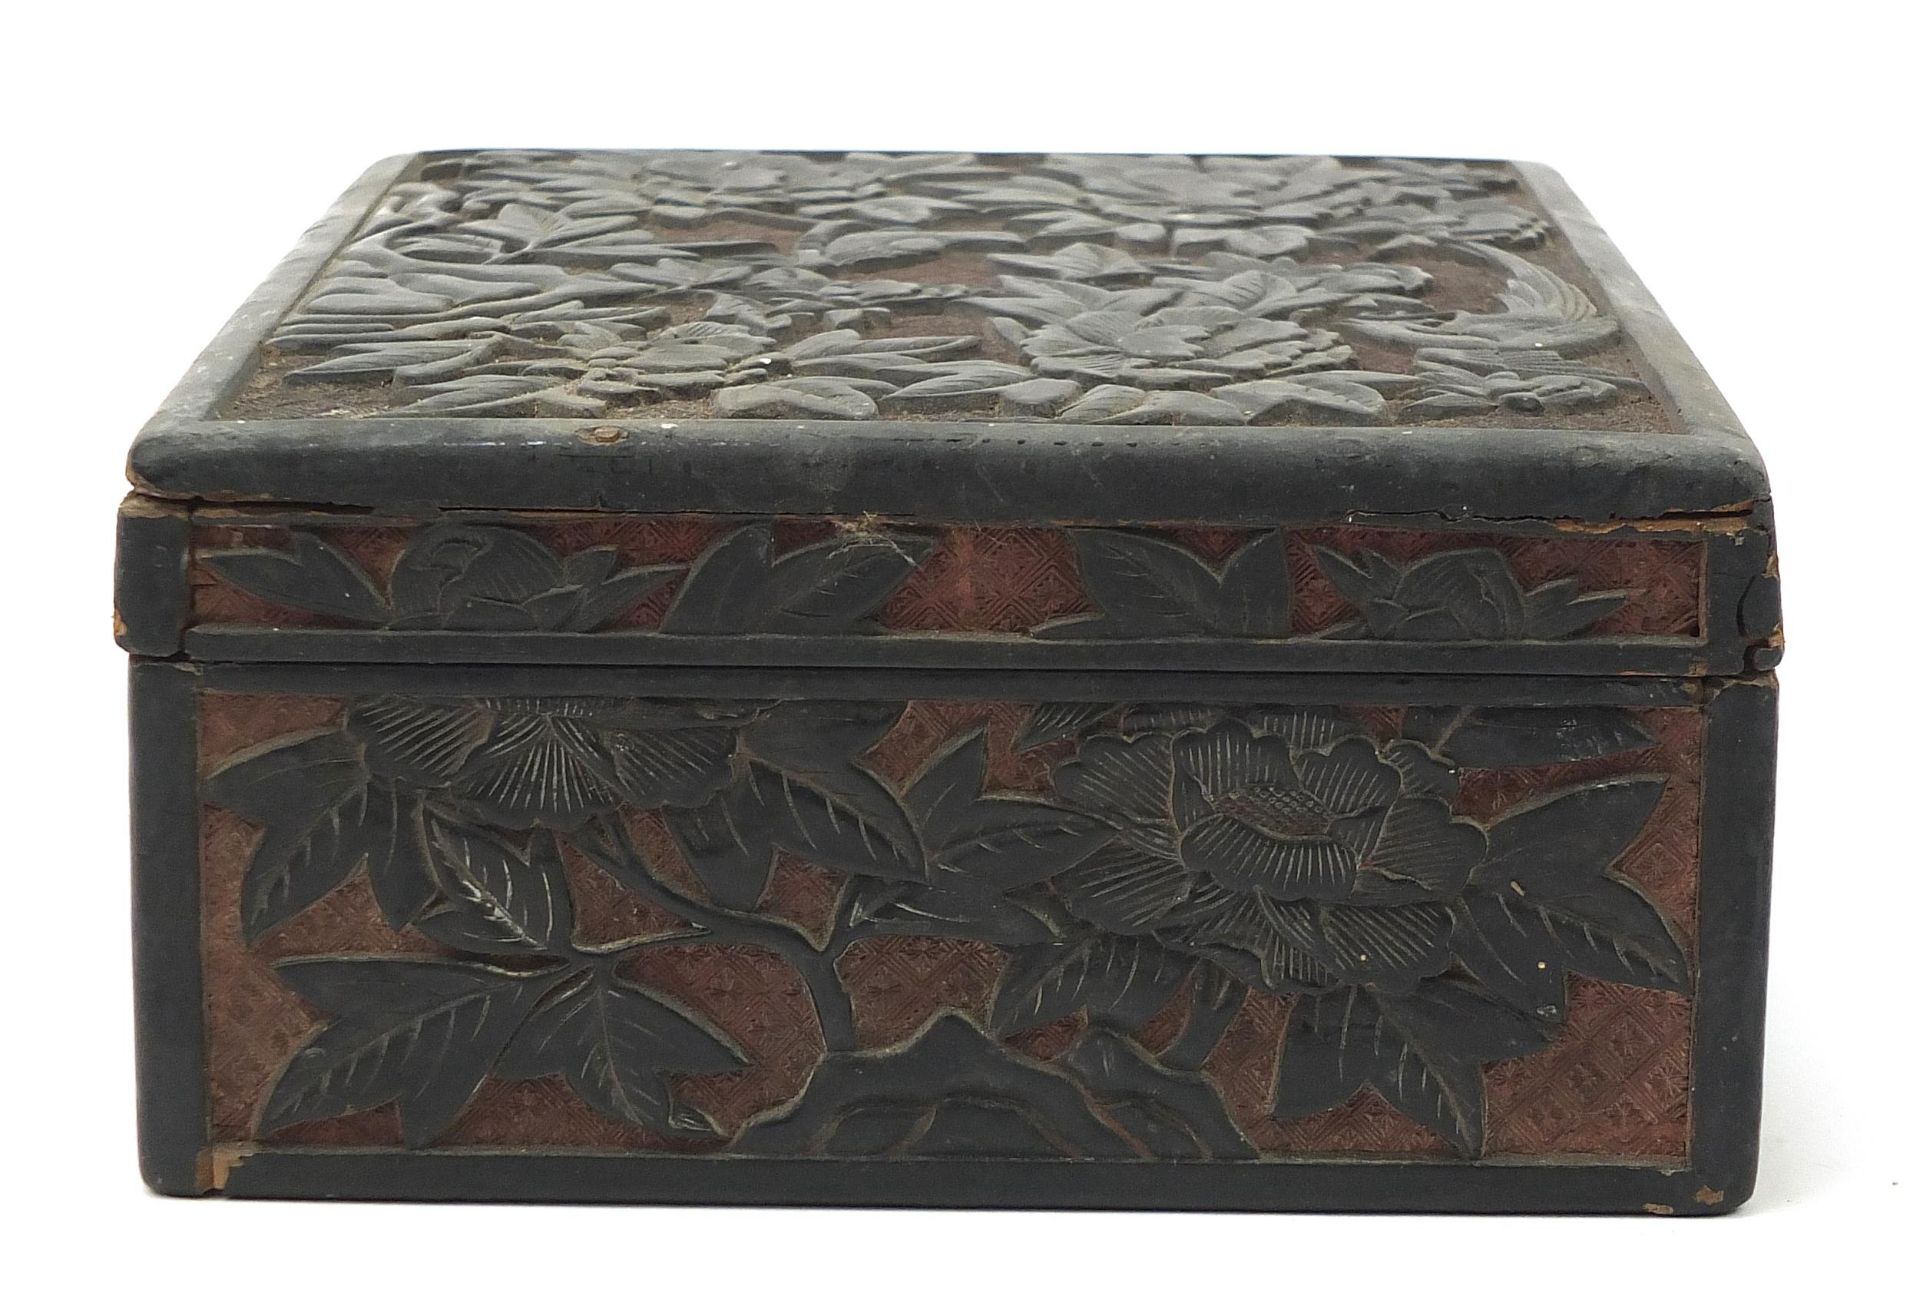 Chinese cinnabar lacquer box and cover carved with birds amongst flowers, 10.5cm H x 29cm W x 21.5cm - Image 4 of 8